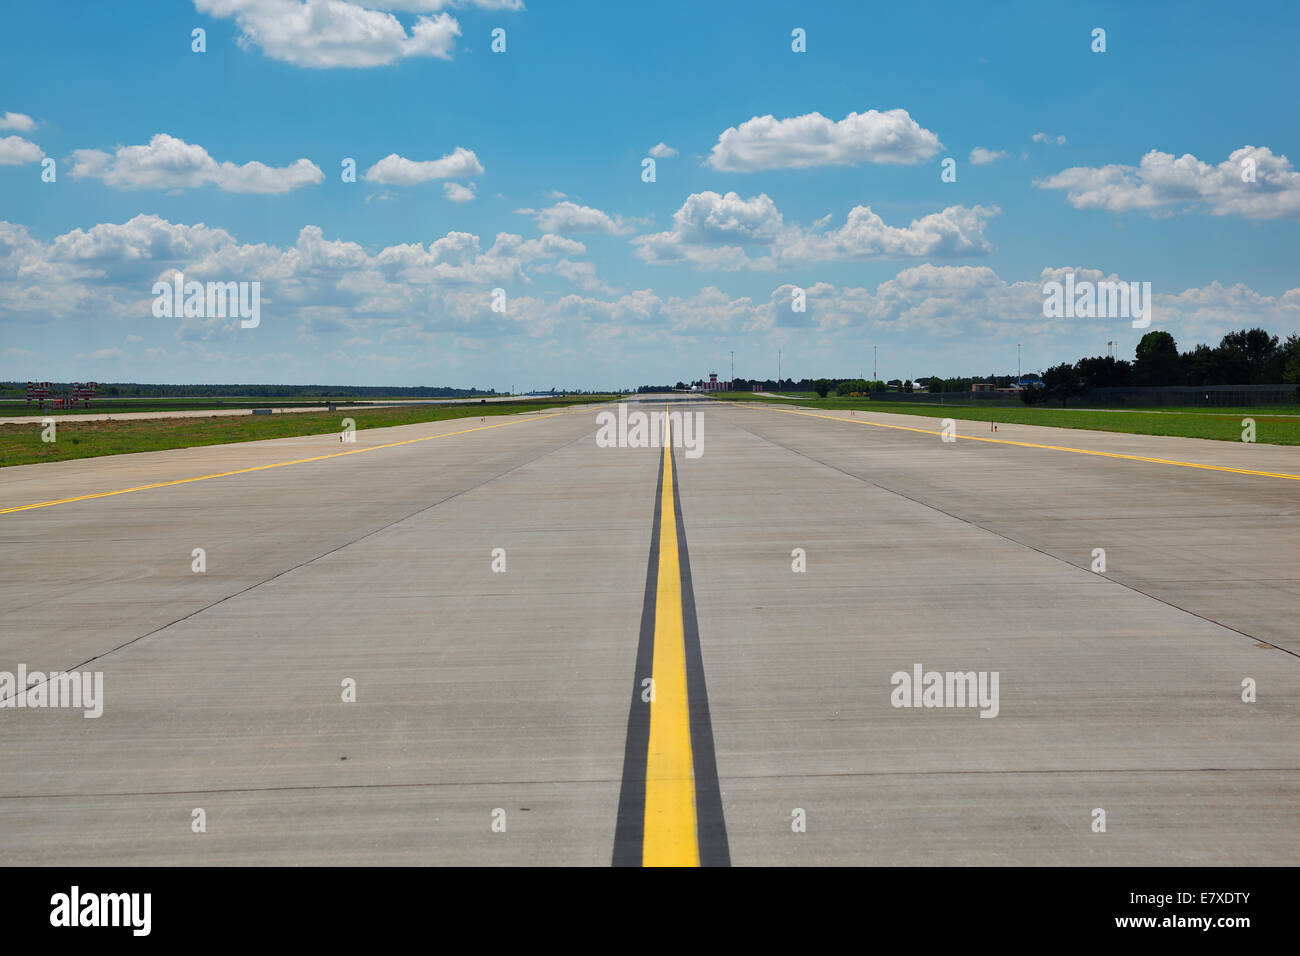 Empty airport runway (taxiway) Stock Photo